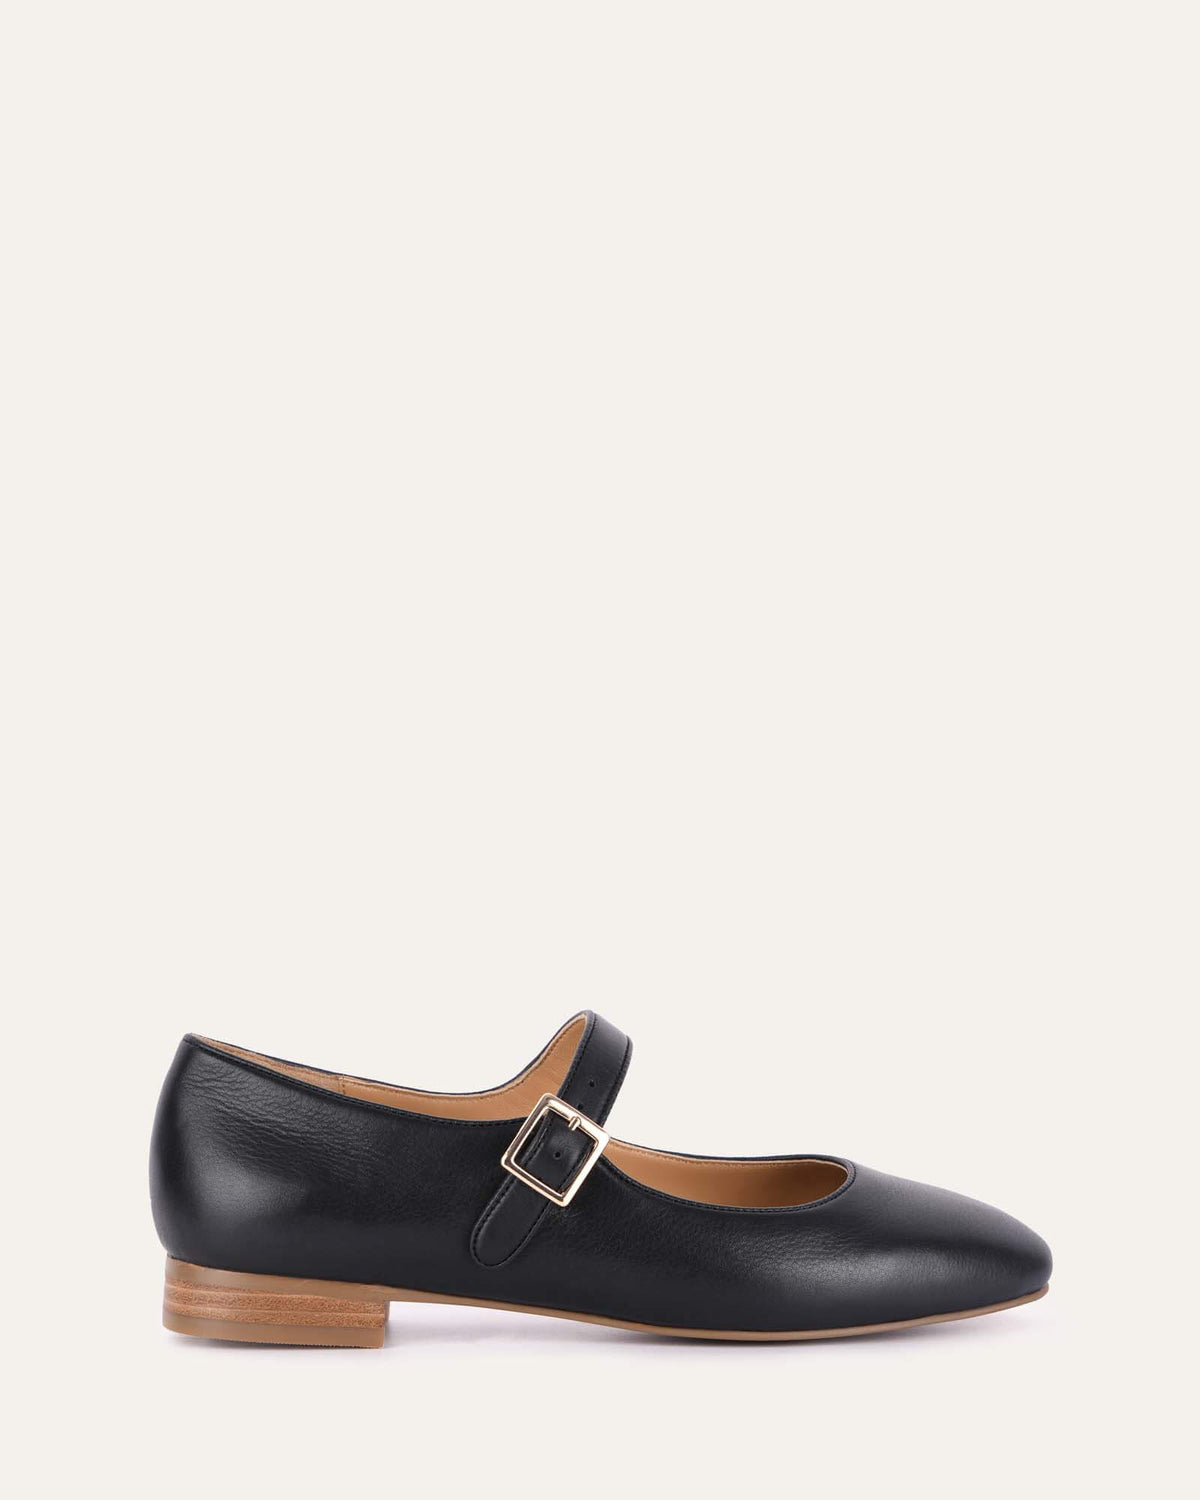 DARCY CASUAL FLATS BLACK LEATHER